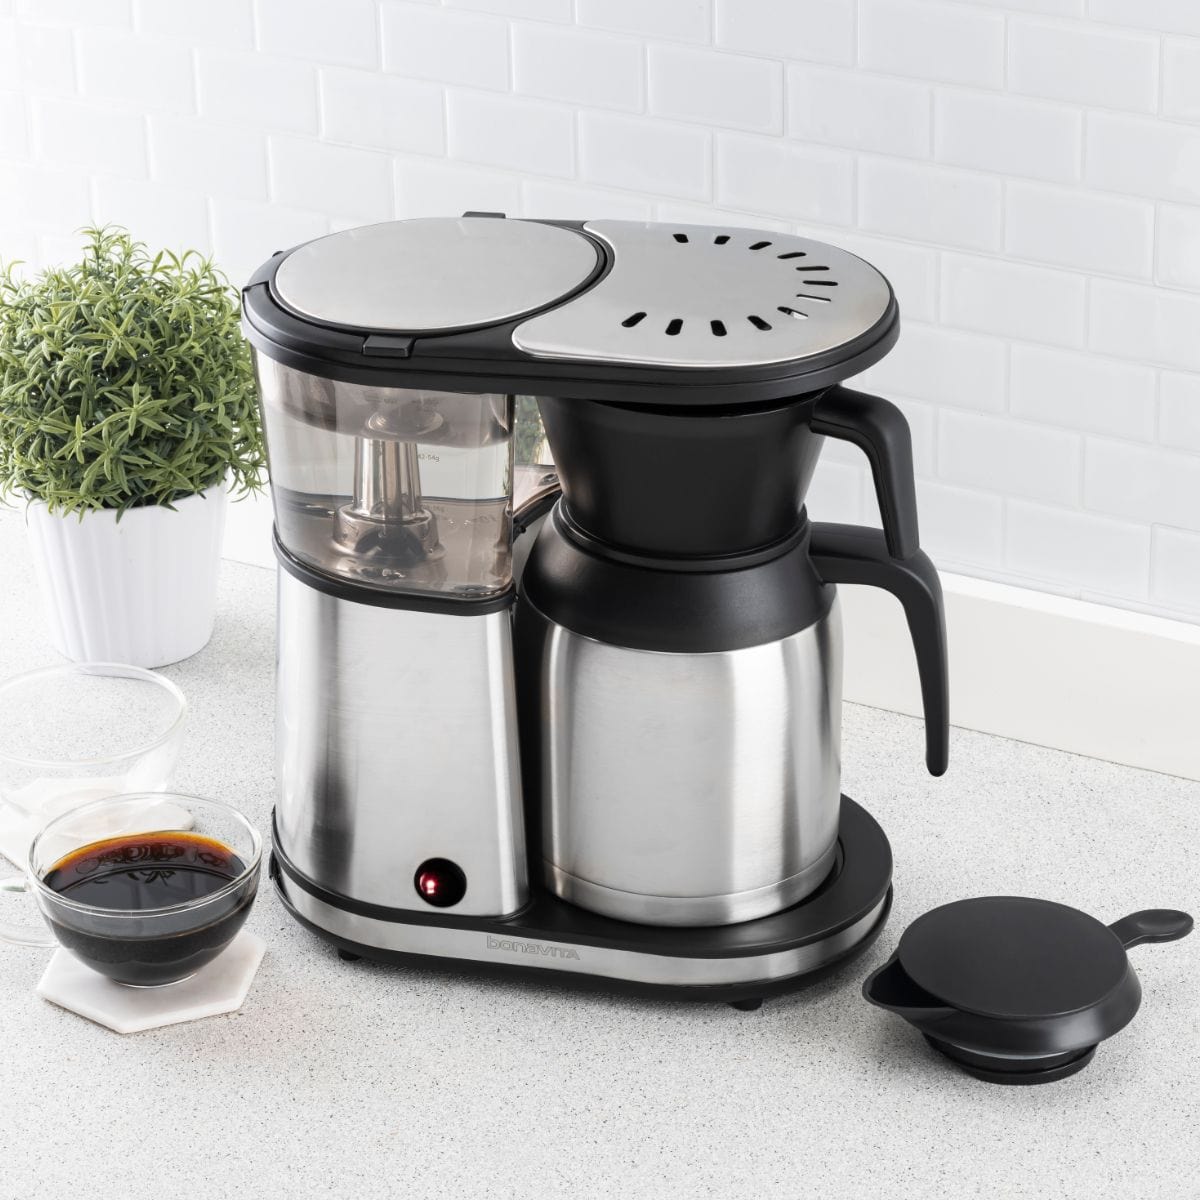 Bunn BTX-B Home Coffee Maker with Thermal Carafe - Black/Stainless